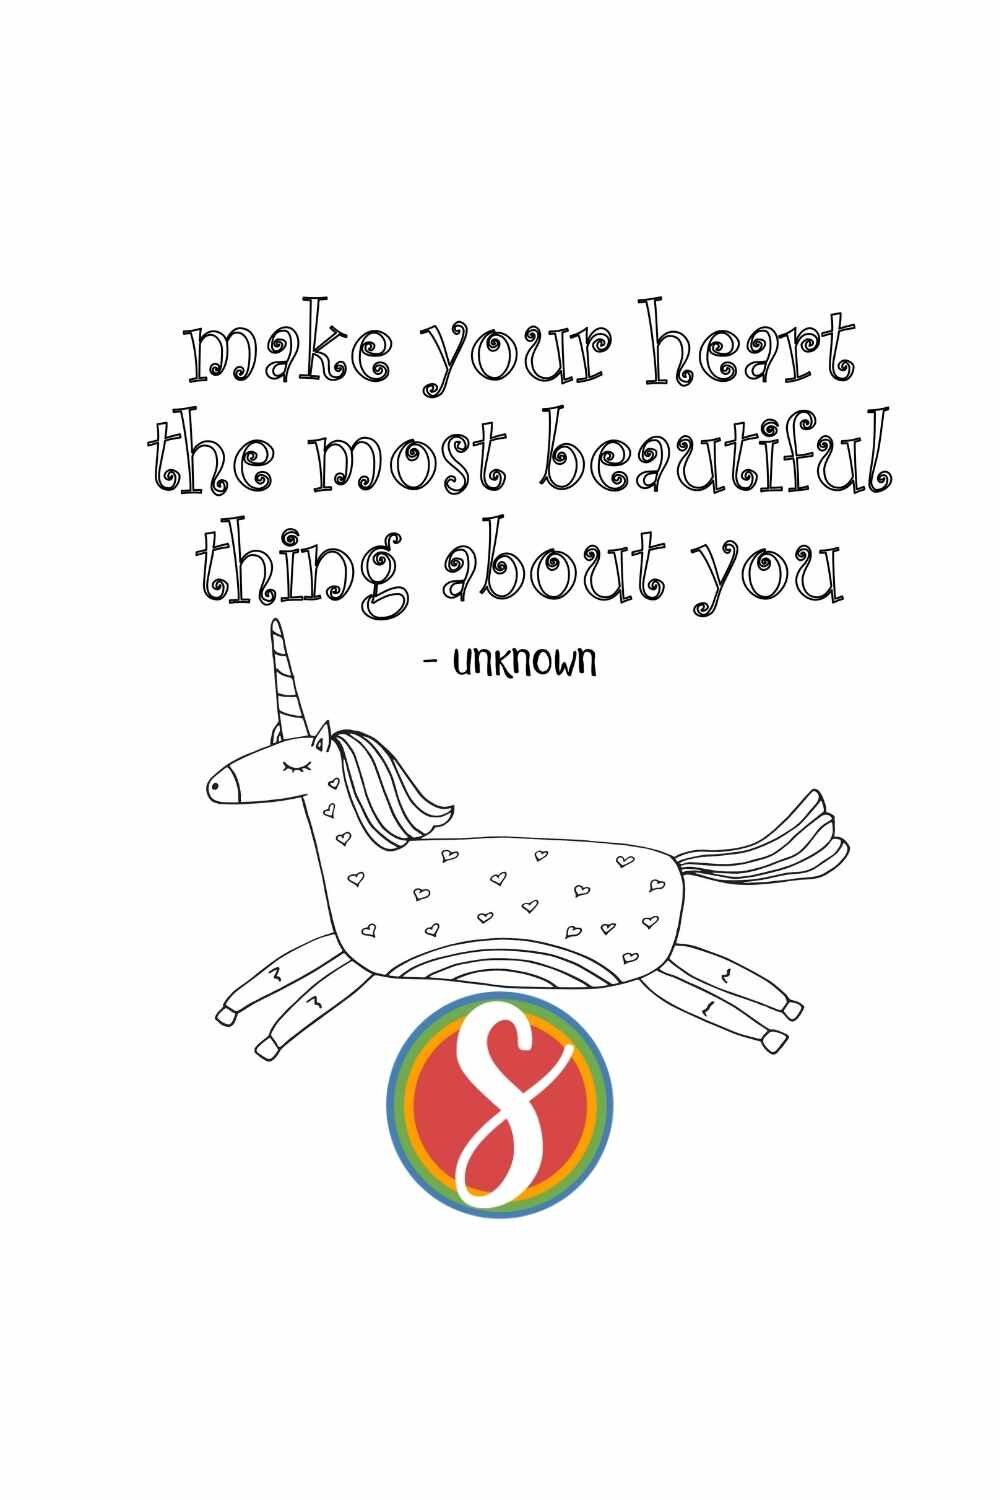 Free unicorn coloring page with “Make your heart the most beautiful thing about you” quote